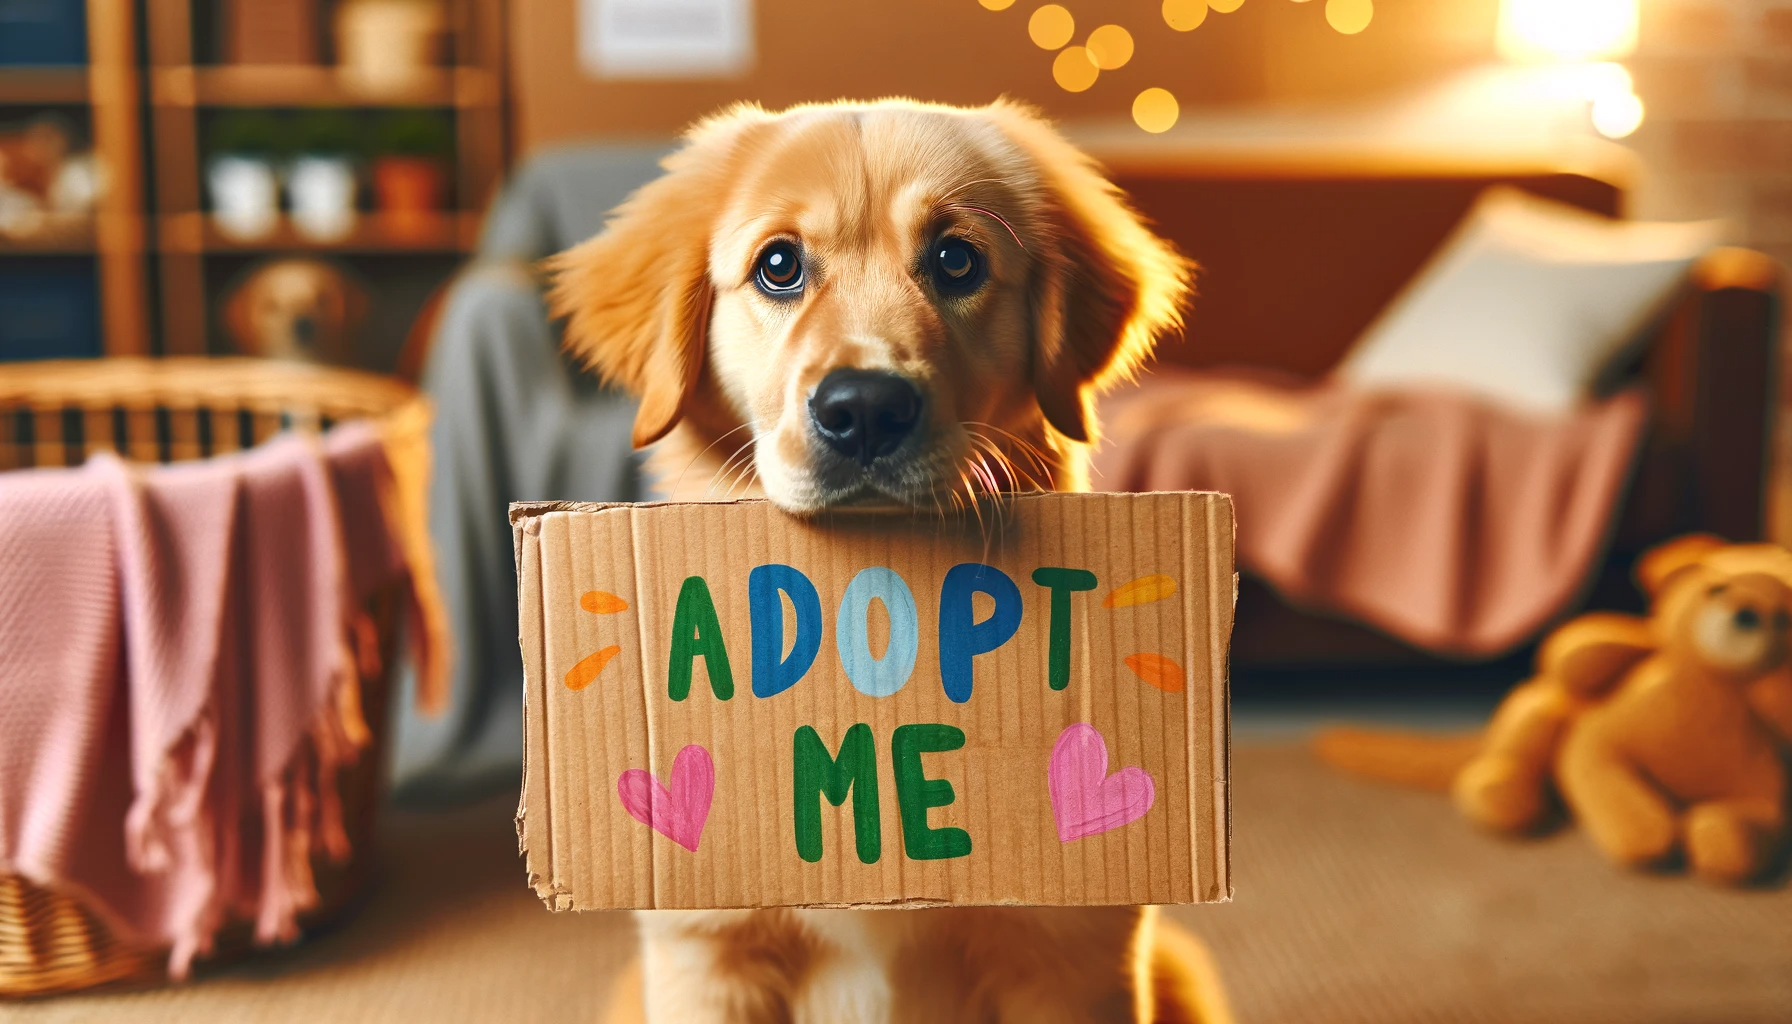 A Goldador holding an 'Adopt Me' sign in its mouth, making a compelling case for why it should be your next family member